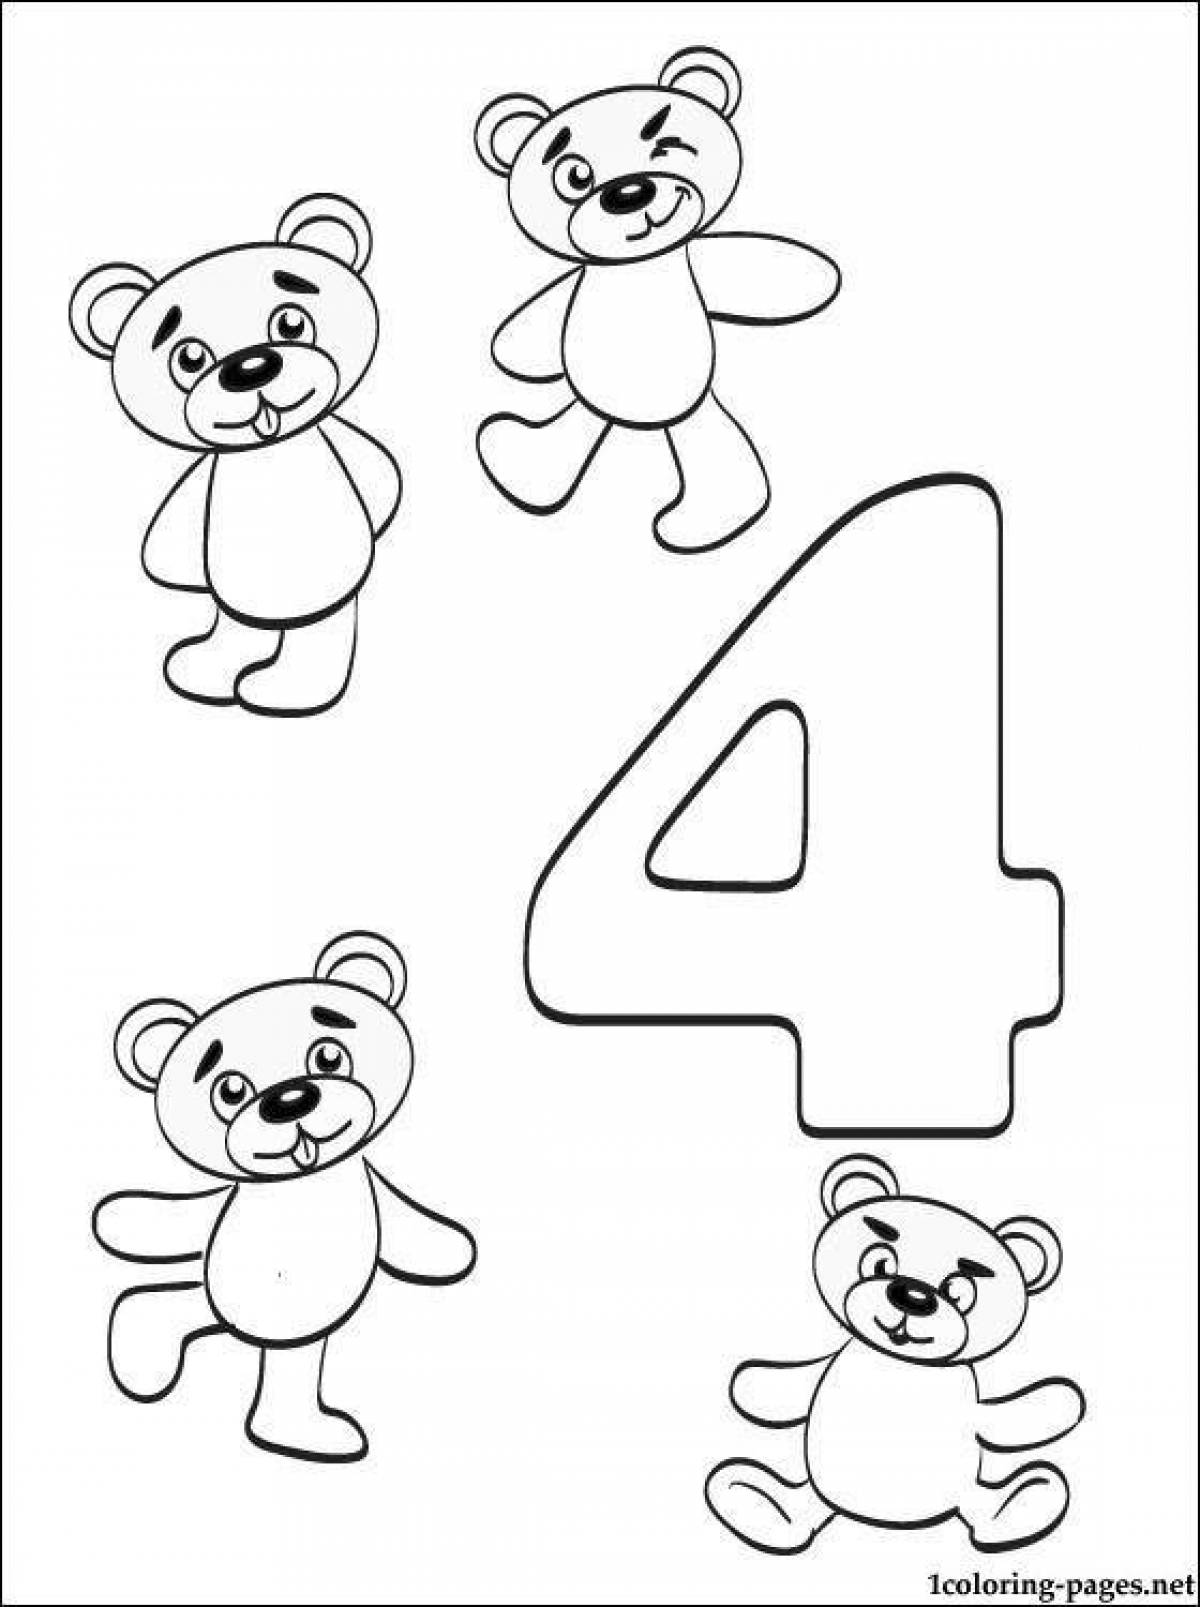 Coloring figures for children 3-4 years old